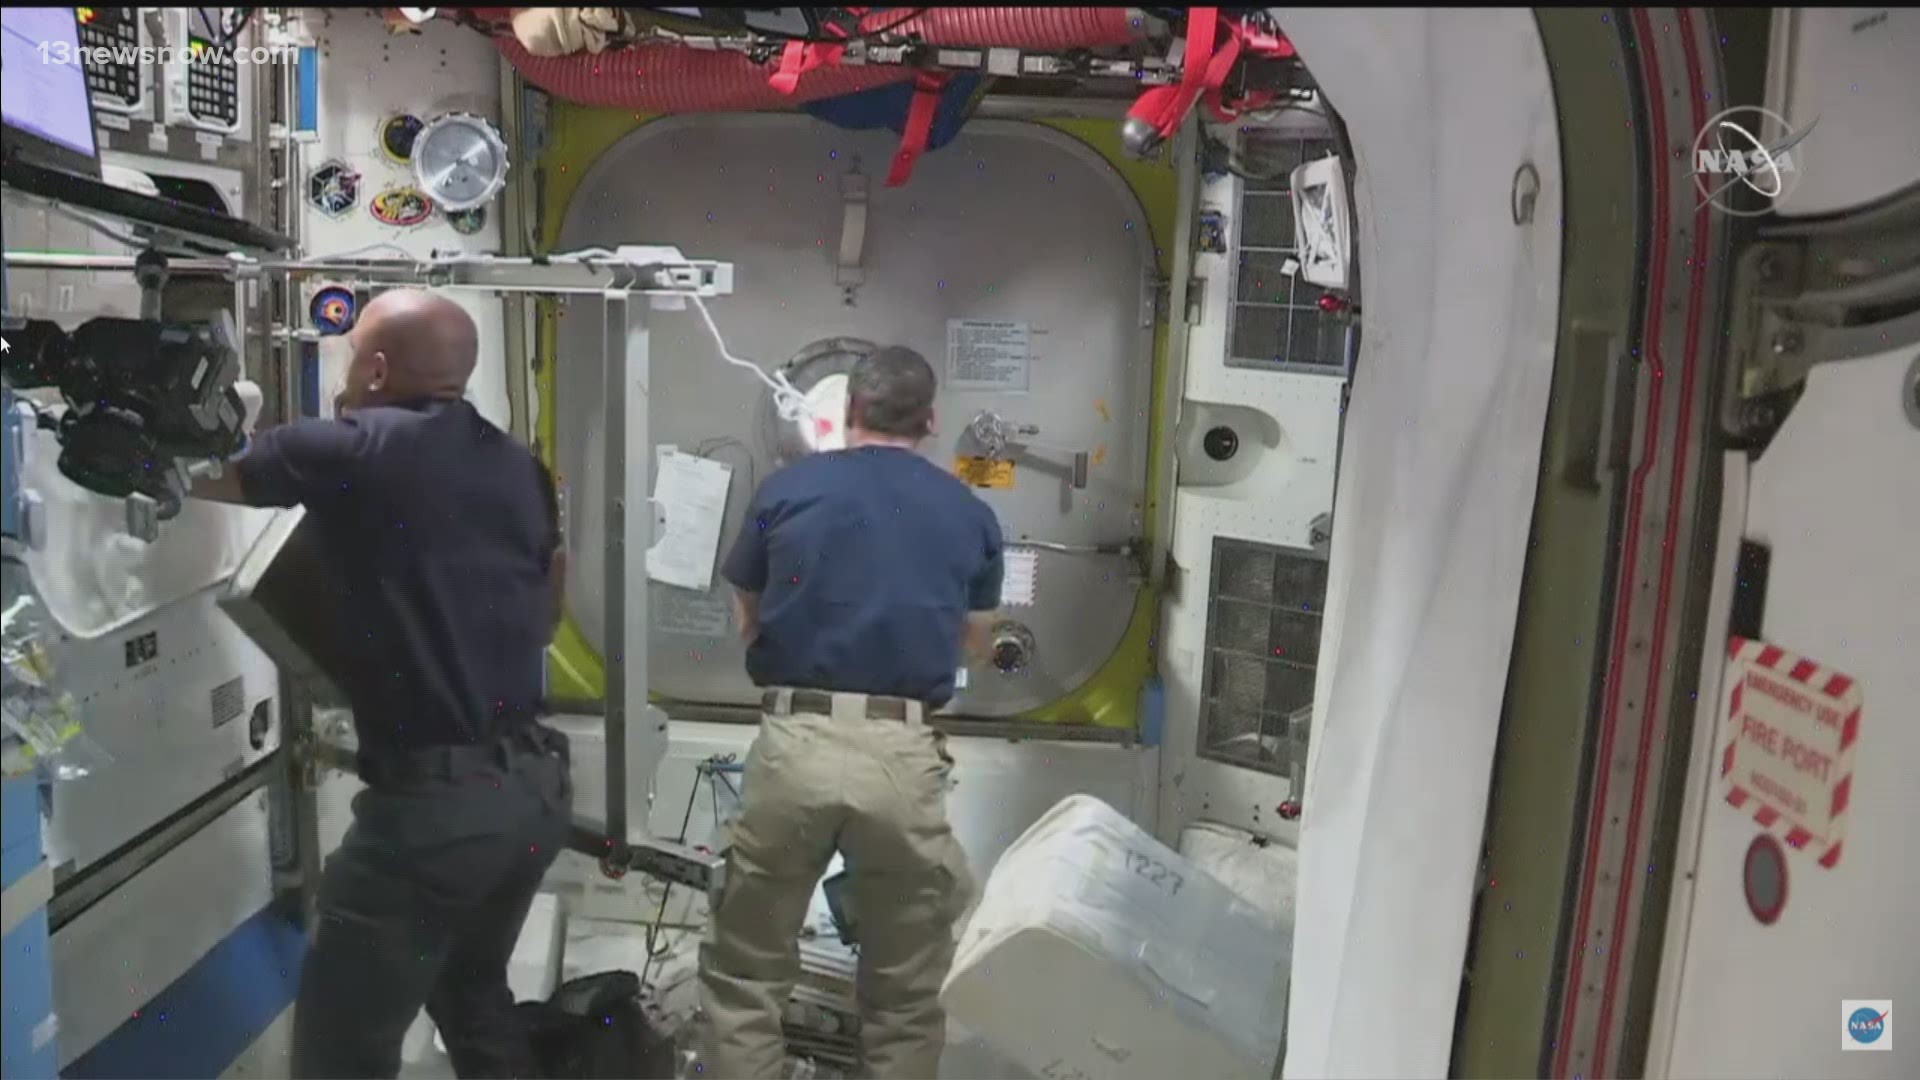 The spacewalking astronauts are preparing International Space Station for new solar arrays.